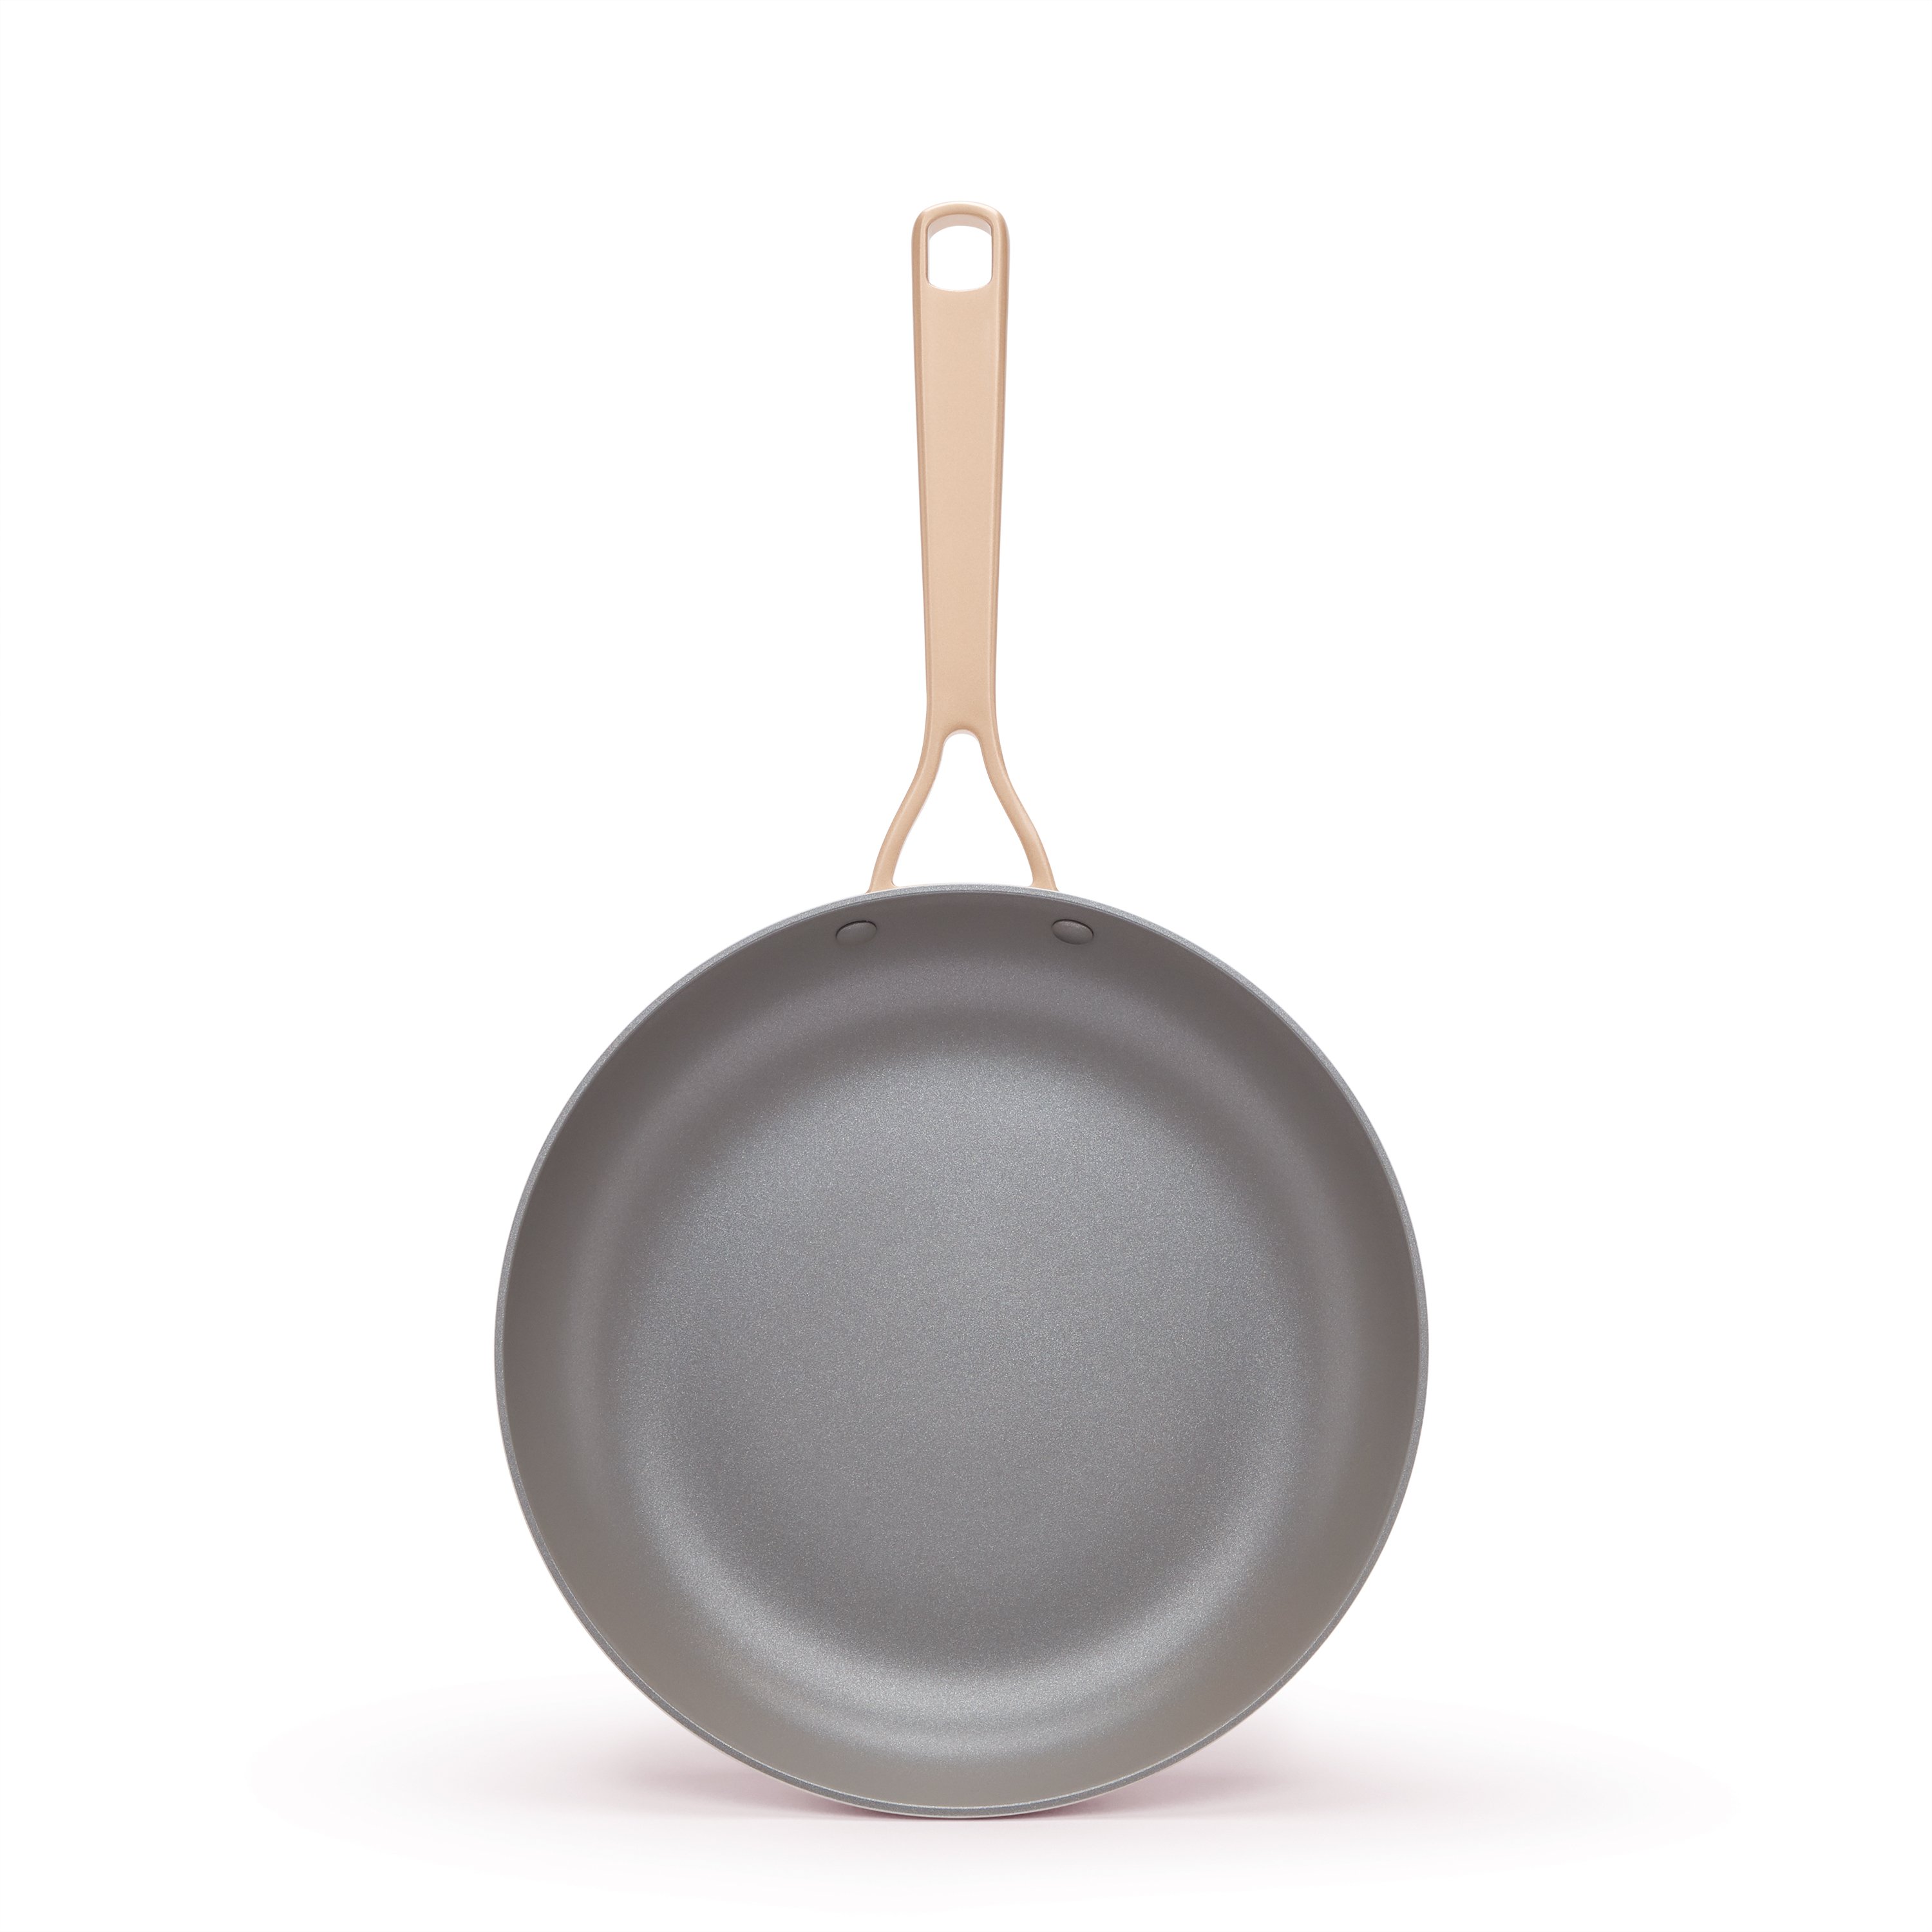 Tramontina Non-Stick Red Fry Pan & Griddle Set - Shop Frying Pans &  Griddles at H-E-B